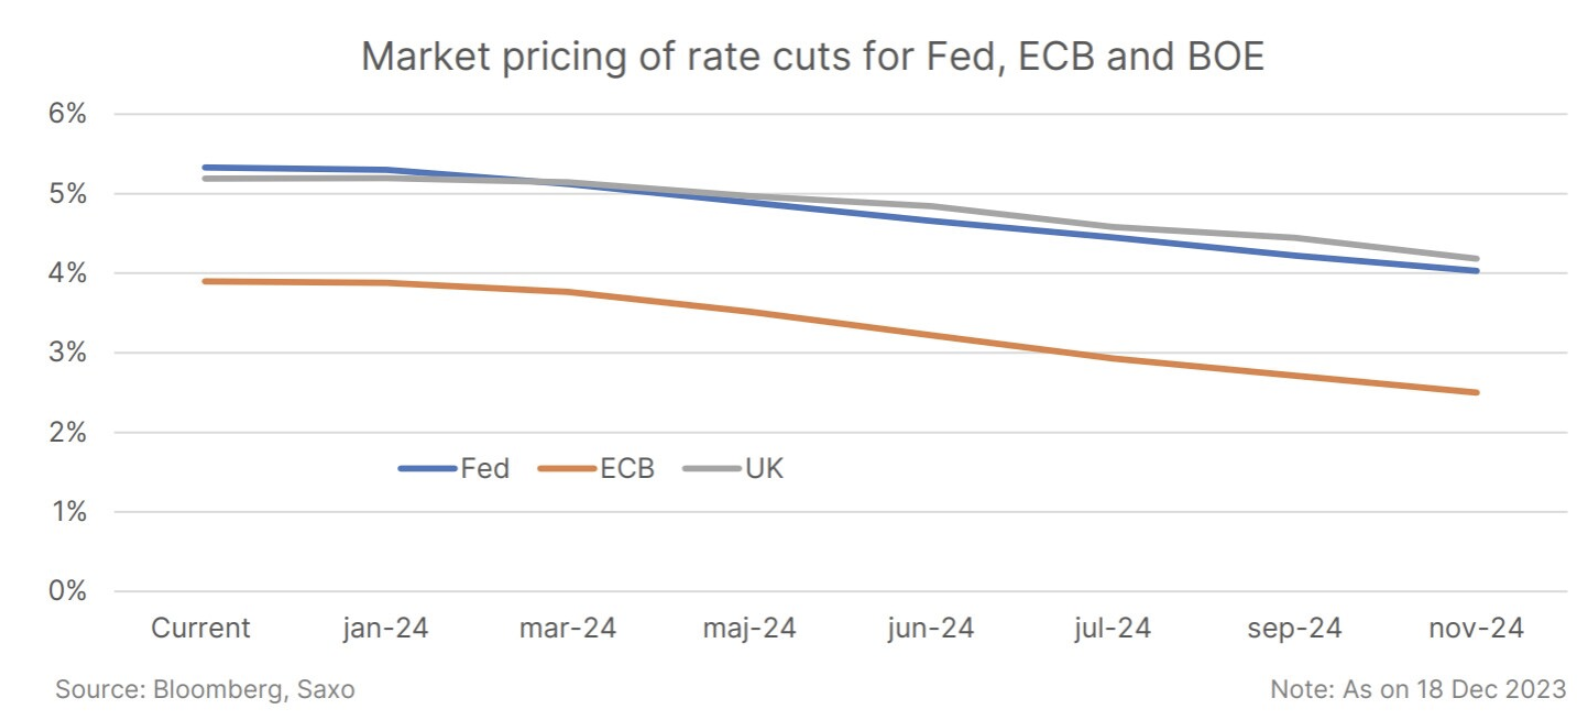 1 market pricing of rate cuts